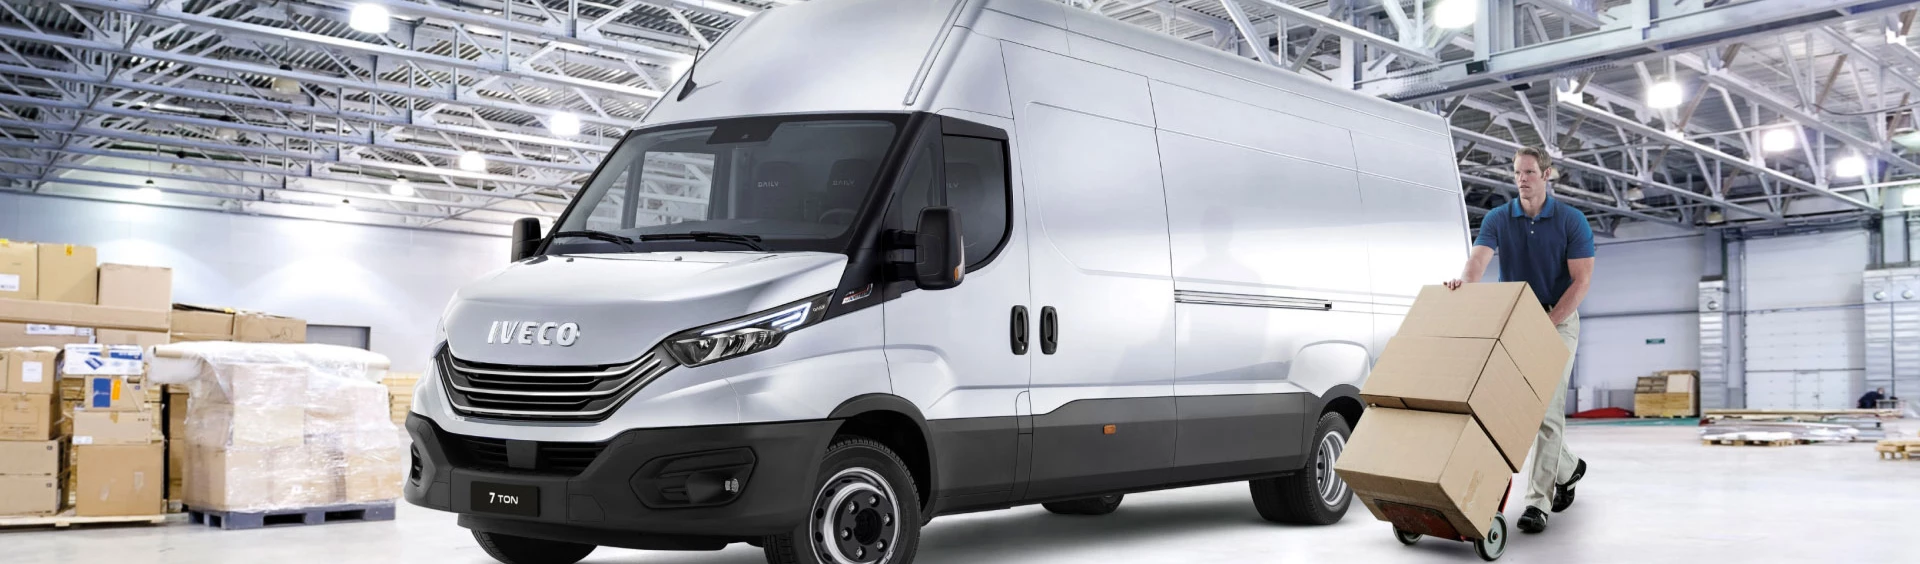 Iveco Daily 7Ton Gallery 1